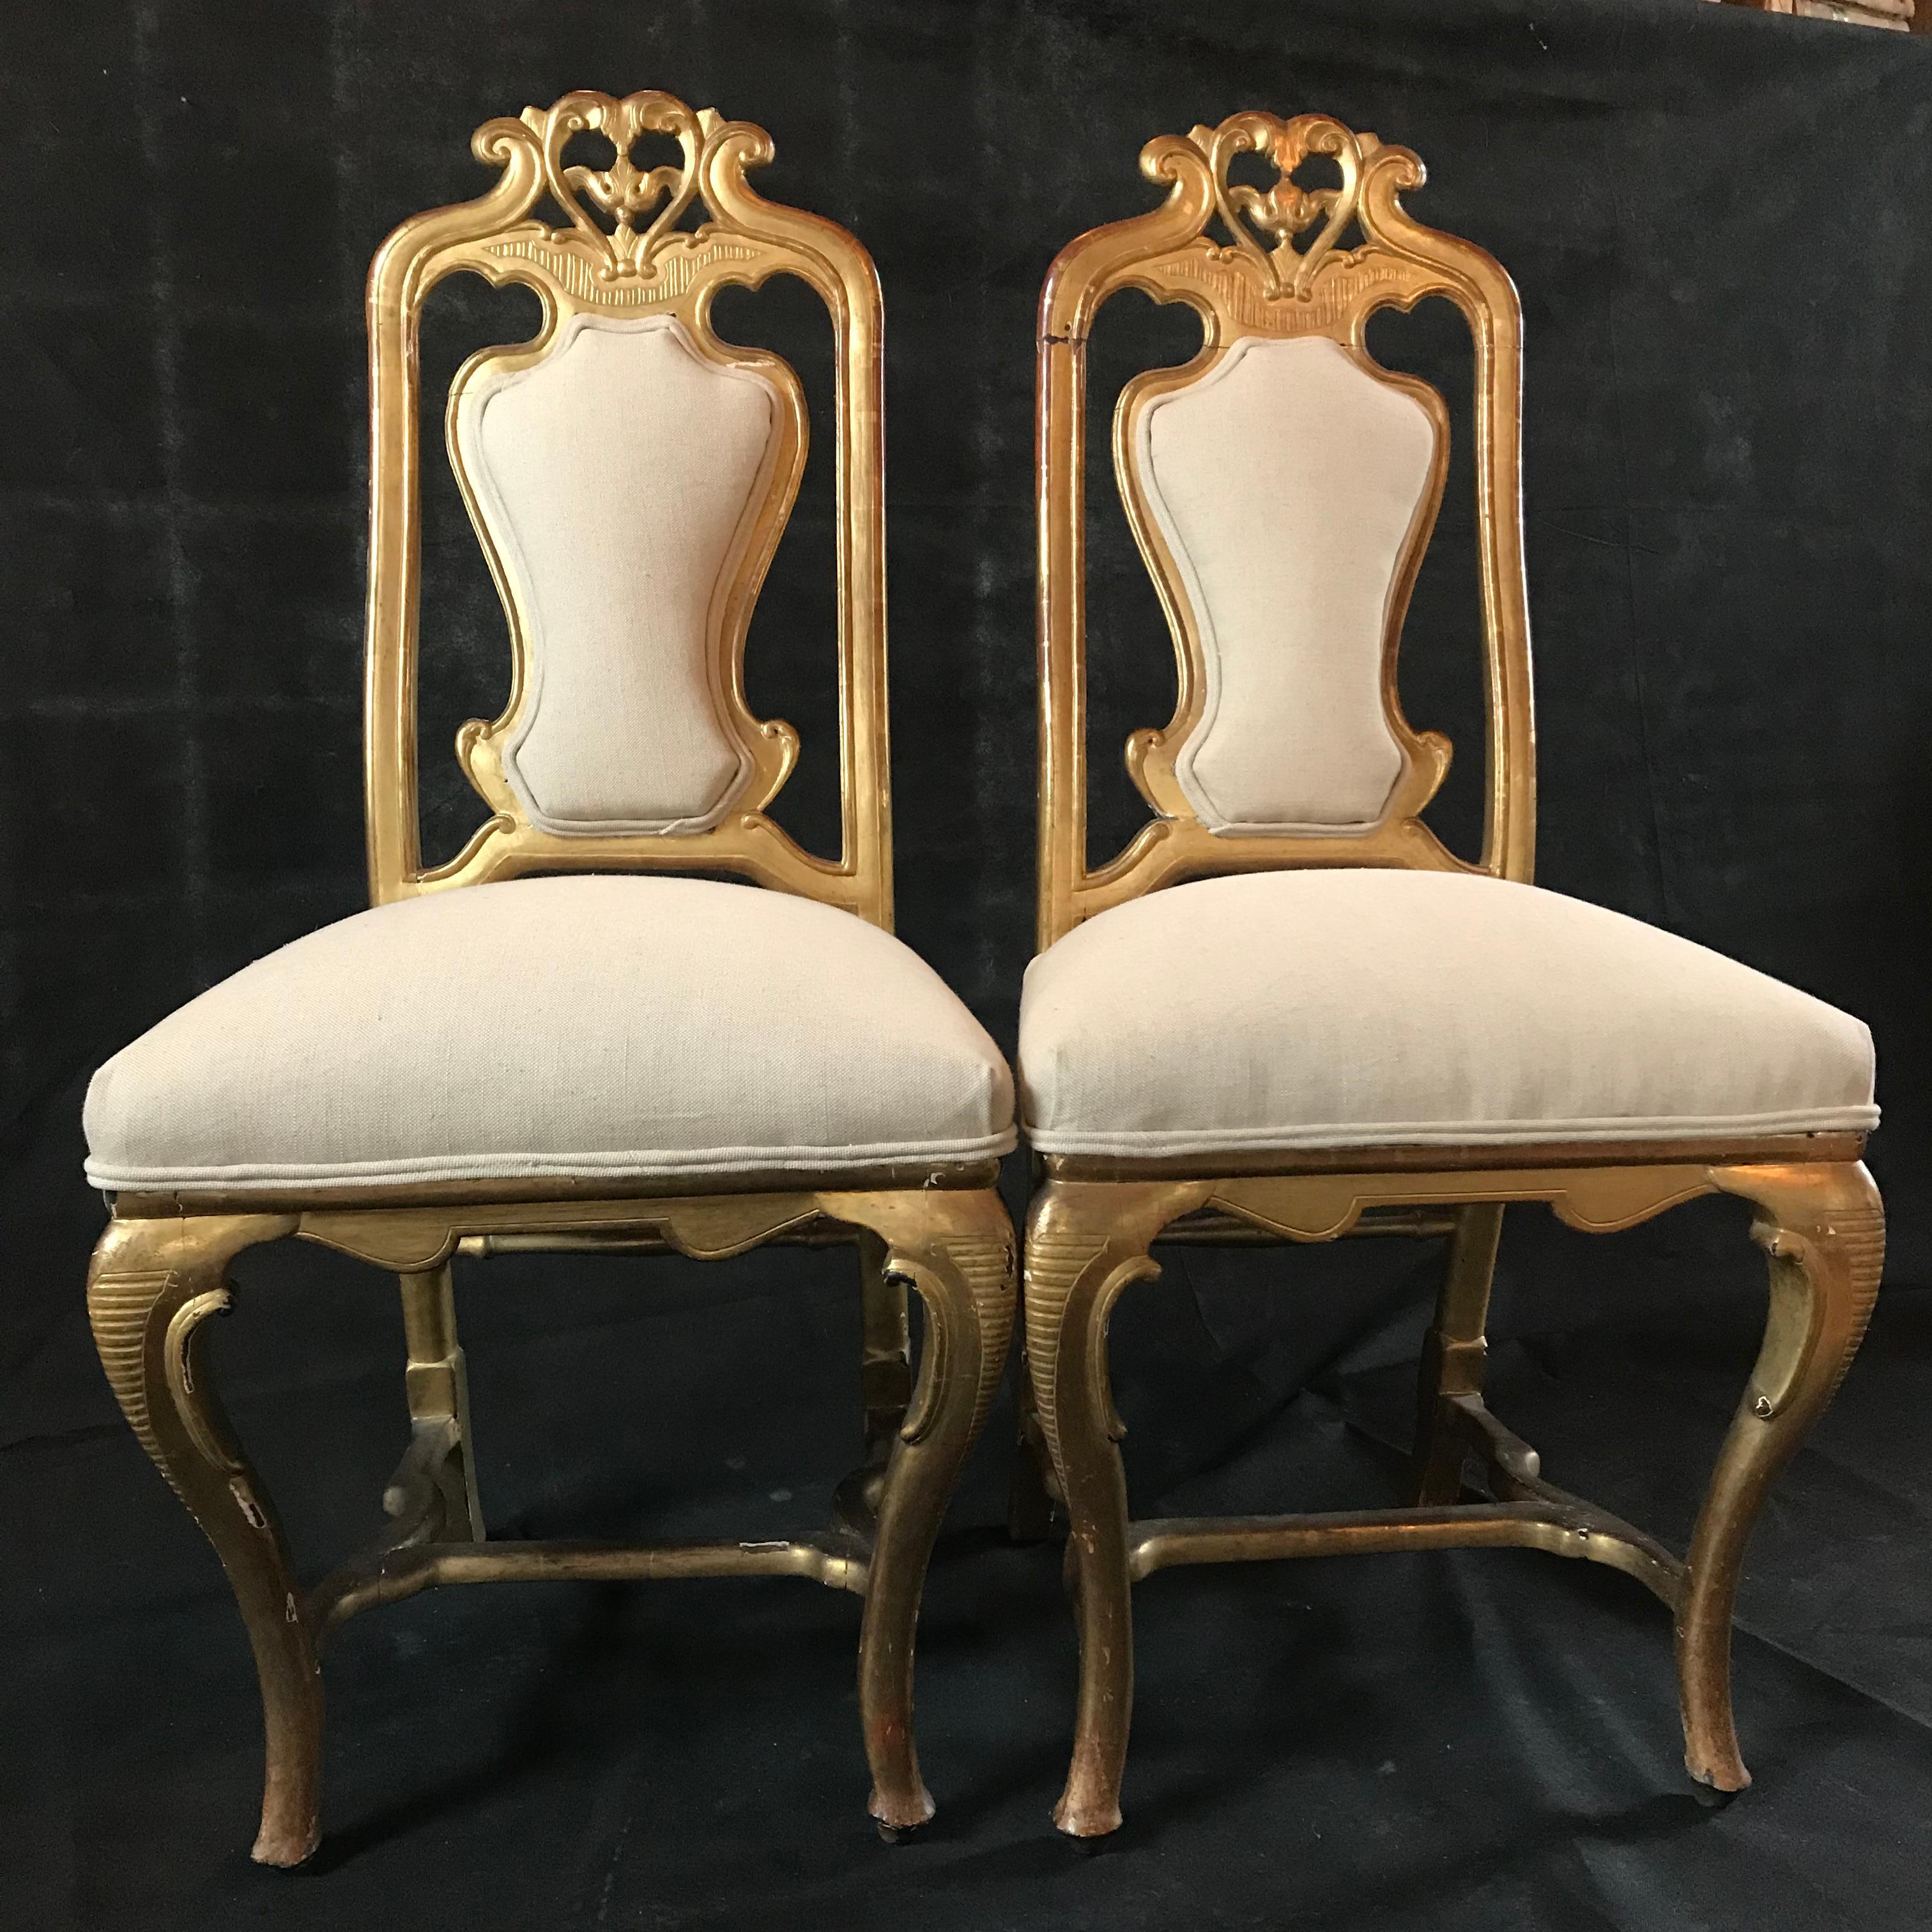 Elegant Pair of French 19th Century Chairs with All Original Gold Gilding For Sale 2